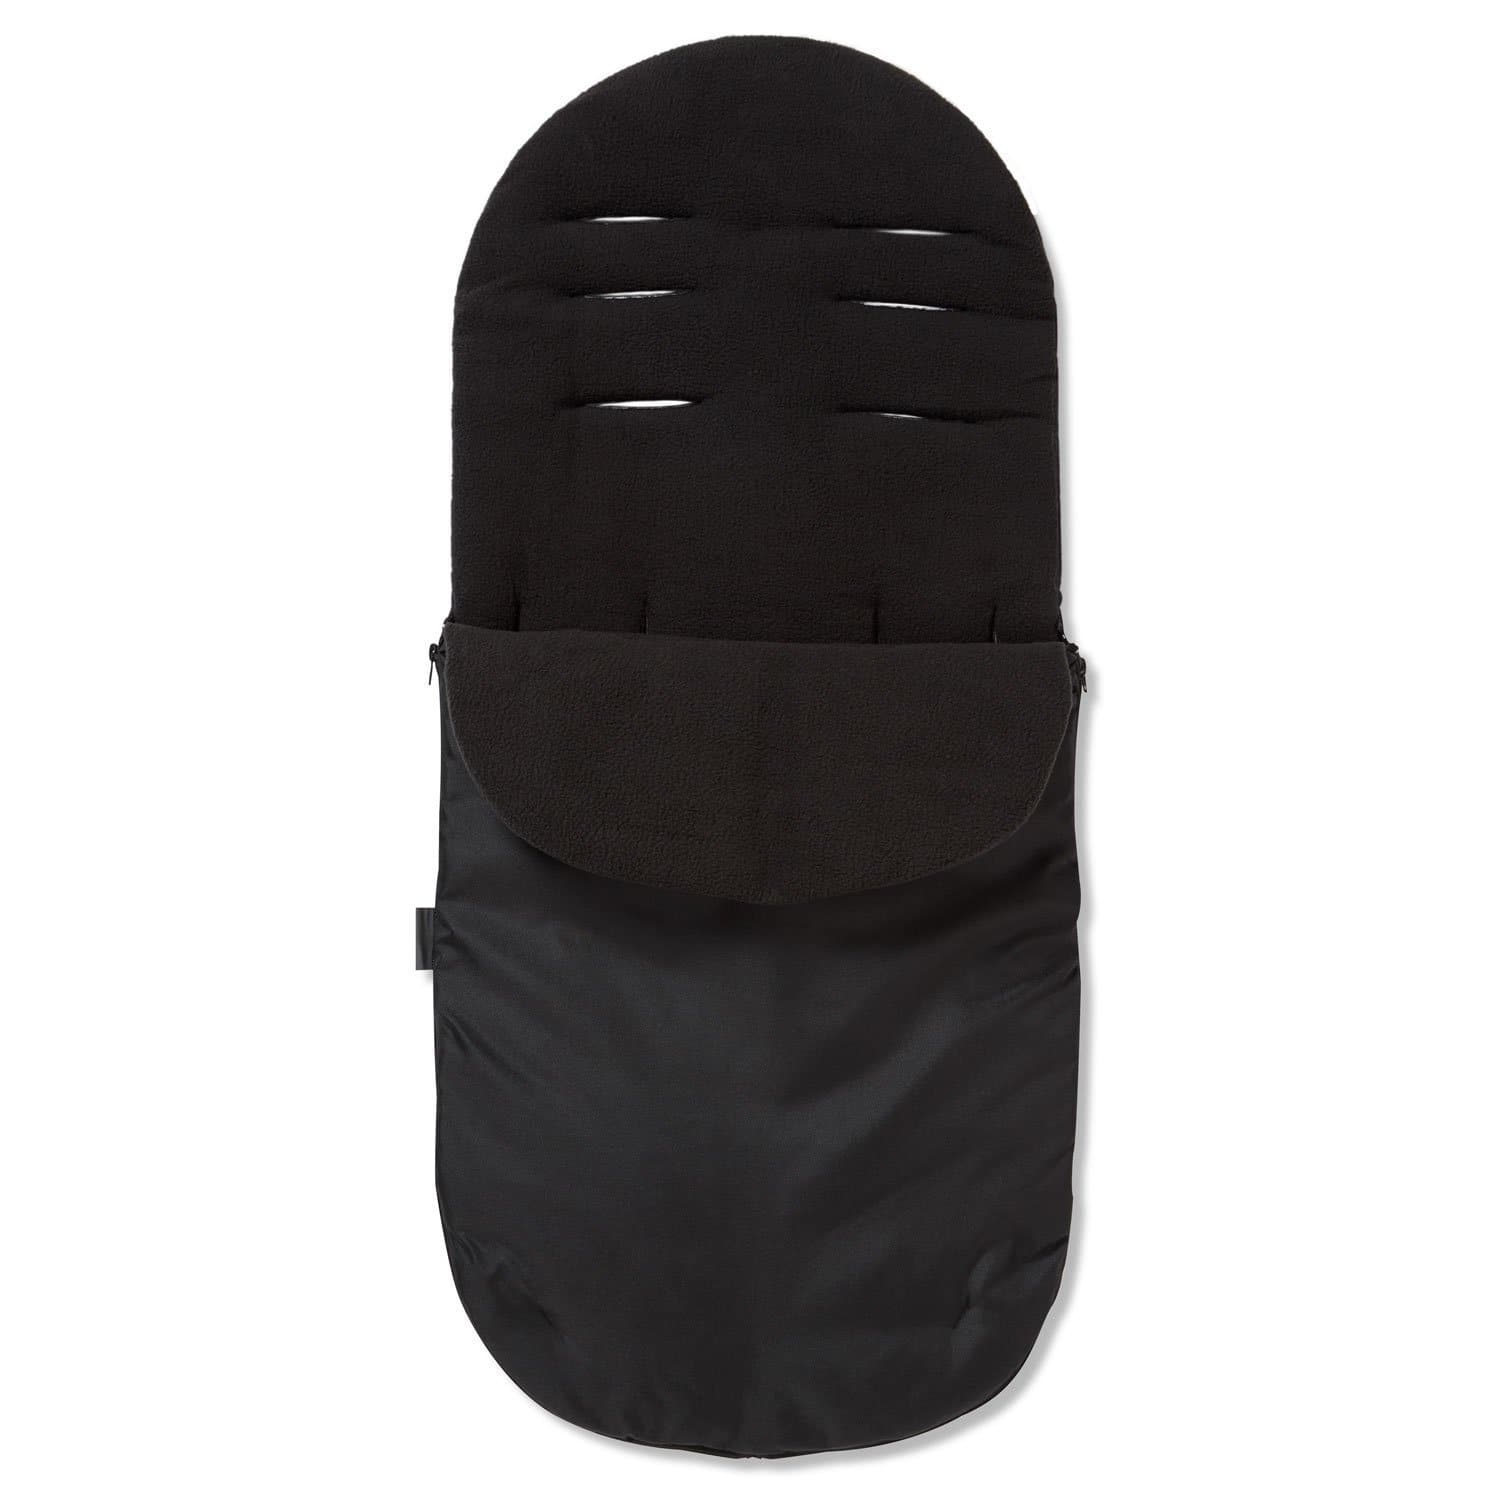 Footmuff / Cosy Toes Compatible with Teutonia - Black / Fits All Models | For Your Little One